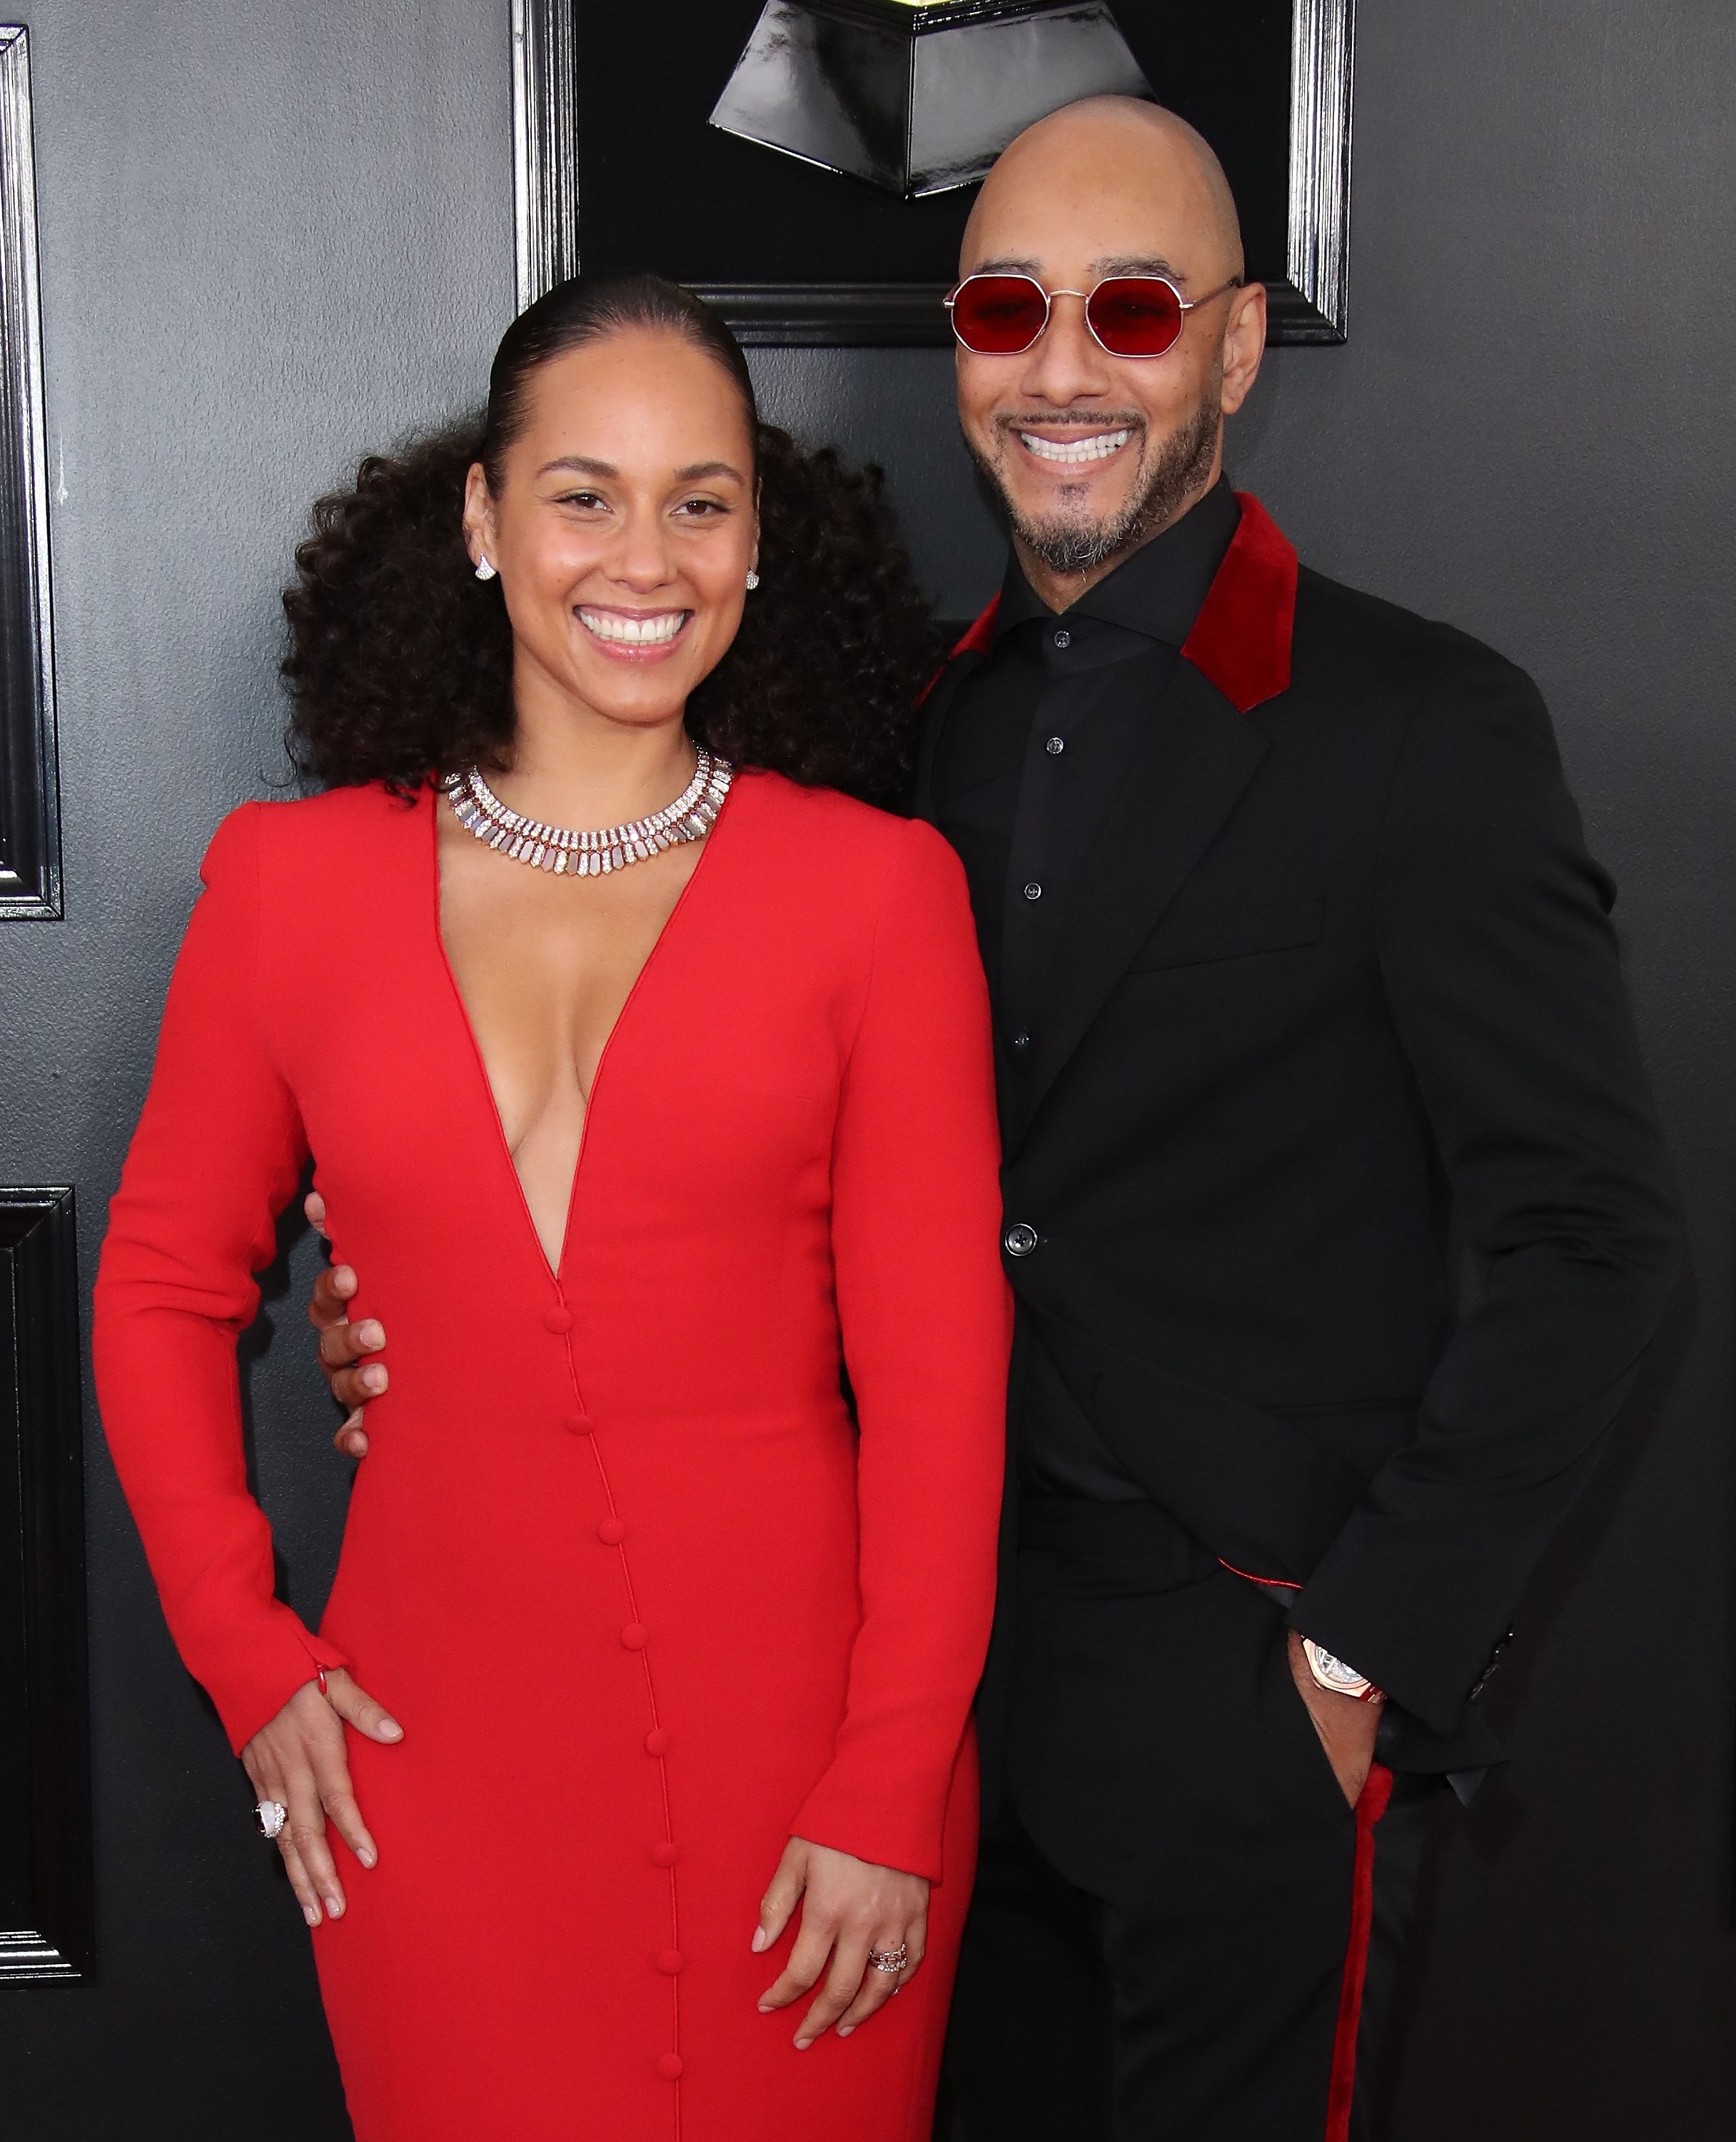 Alicia Keys and Swizz Beatz attend the 61st Annual Grammy Awards at Staples Center in February 2019 in Los Angeles, California. | Photo: Getty Images